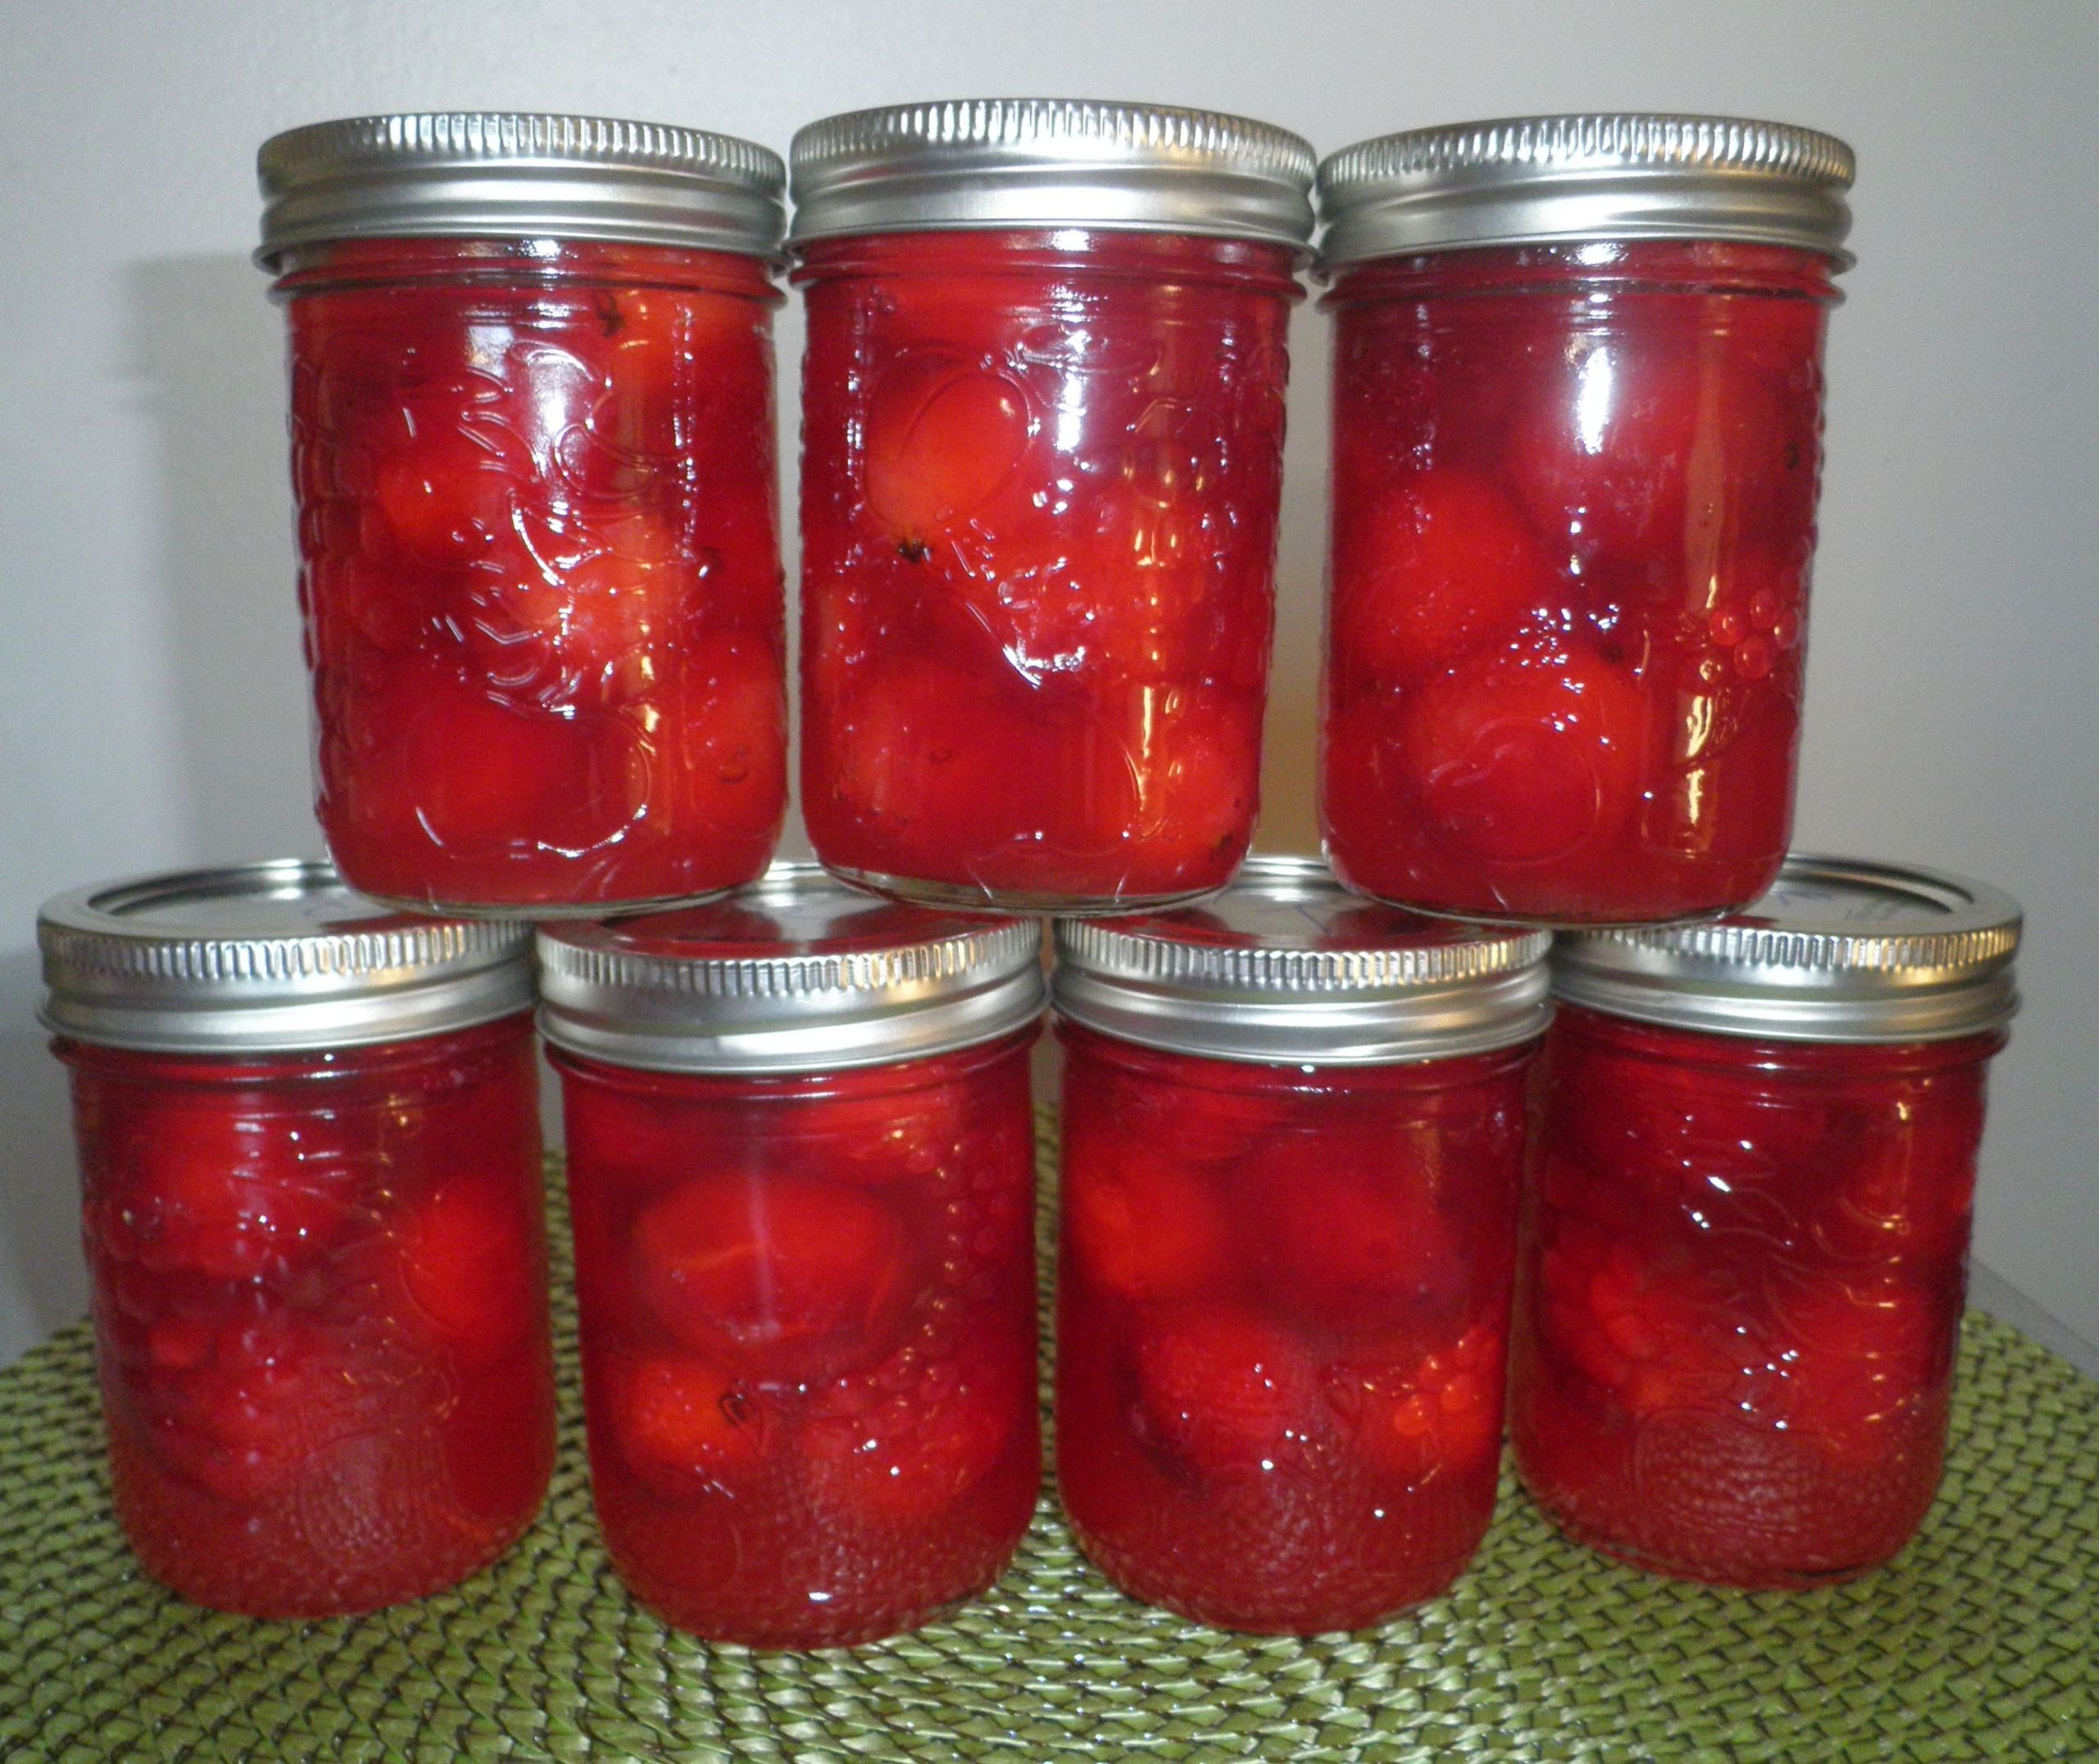 Apple Canning Recipes
 Whole Canned Crabapples recipe from the CRABAPPLE